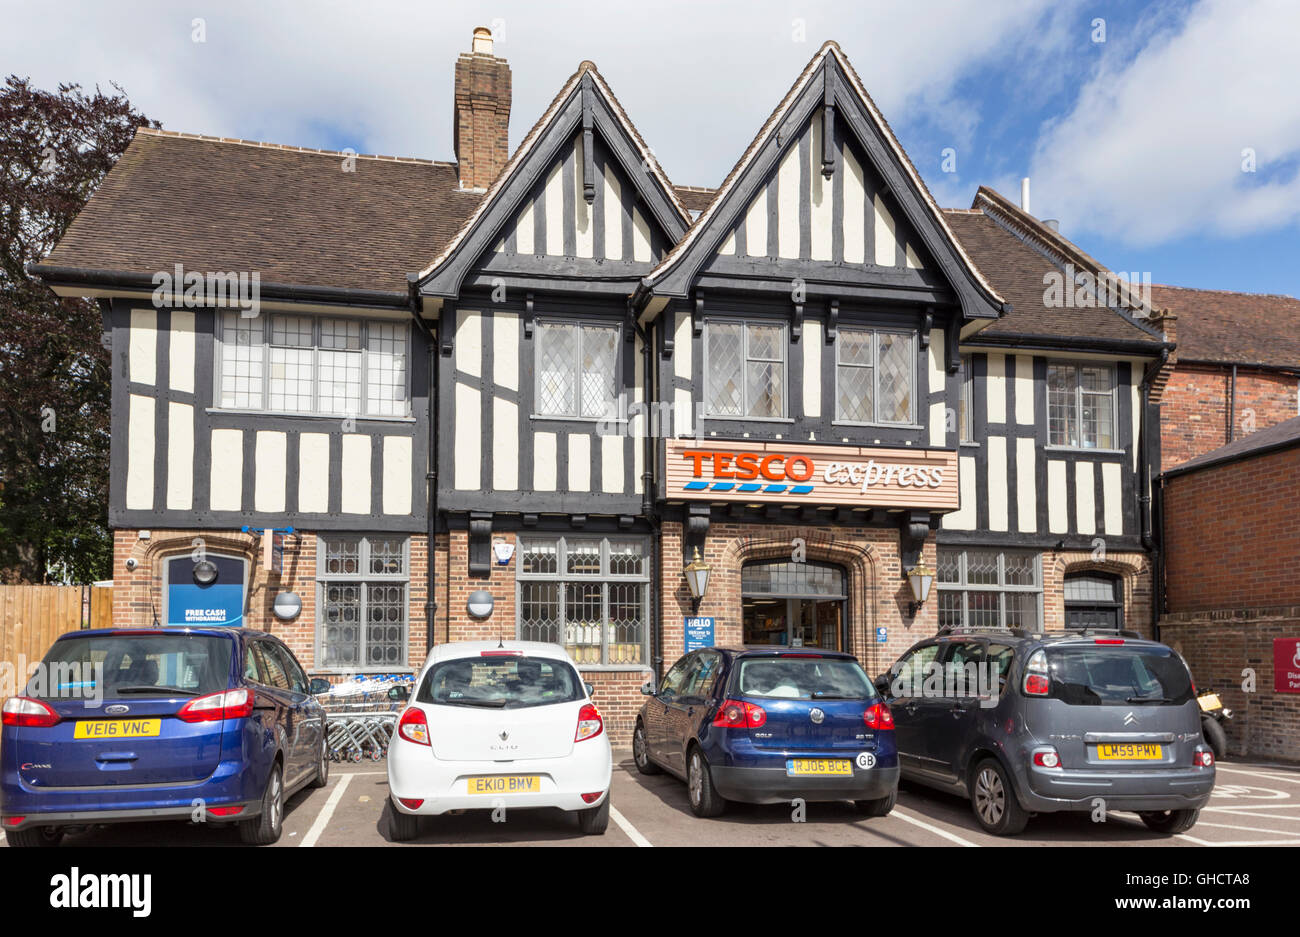 A Tesco express store in Bewdley, Worcestershire, England, UK Stock Photo